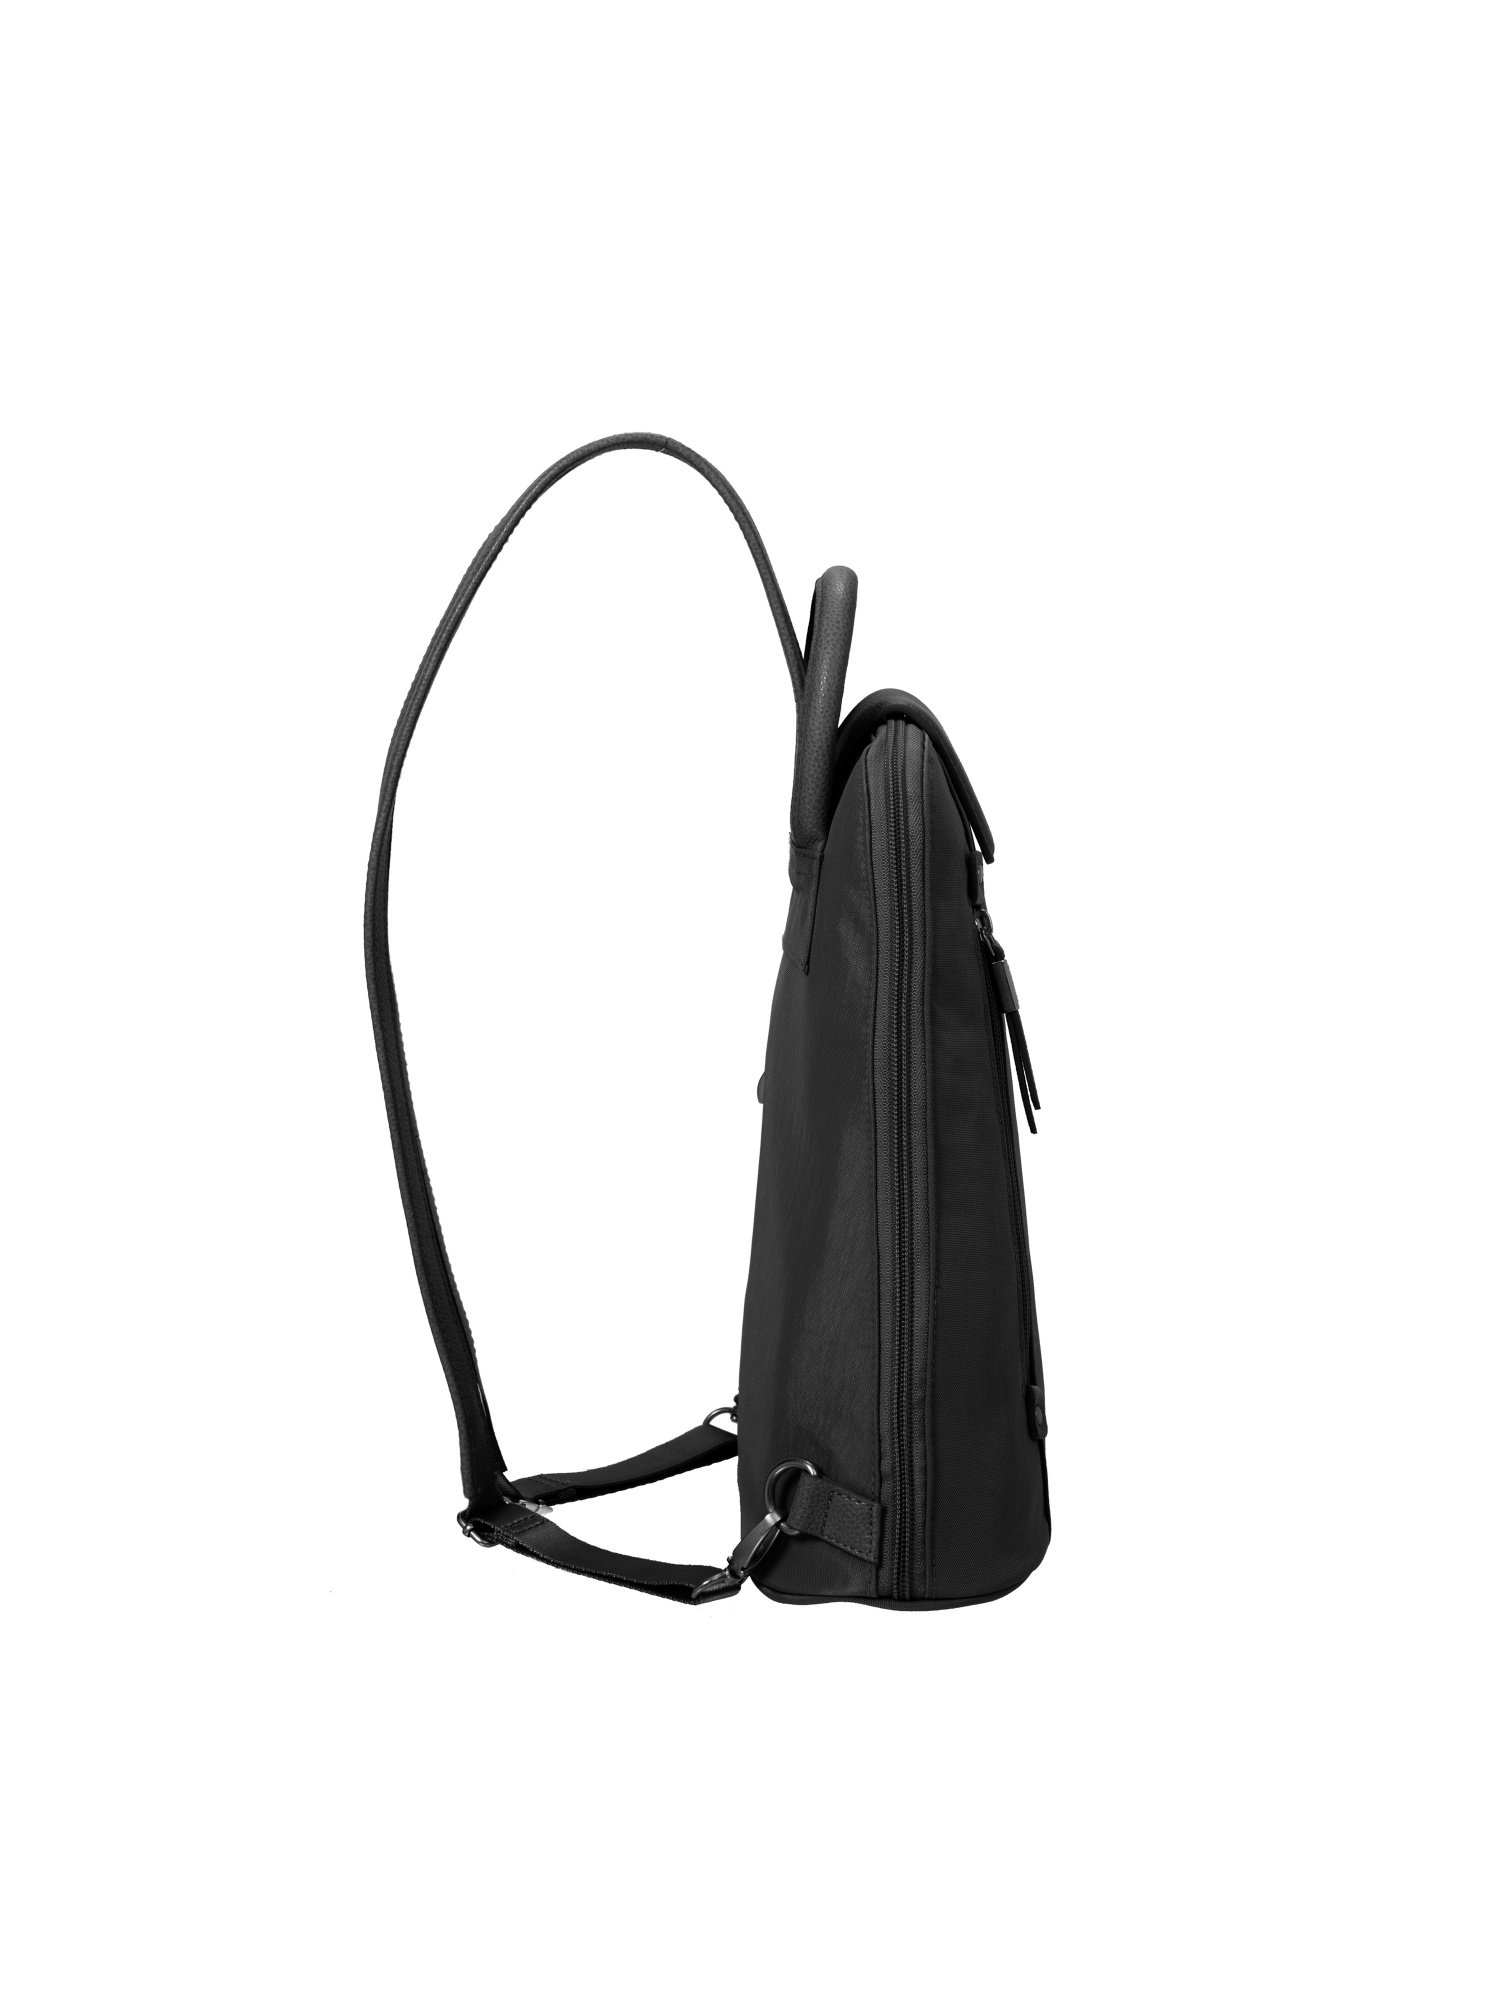 baggallini Women's Metro Backpack with RFID Phone Wristlet - image 3 of 4